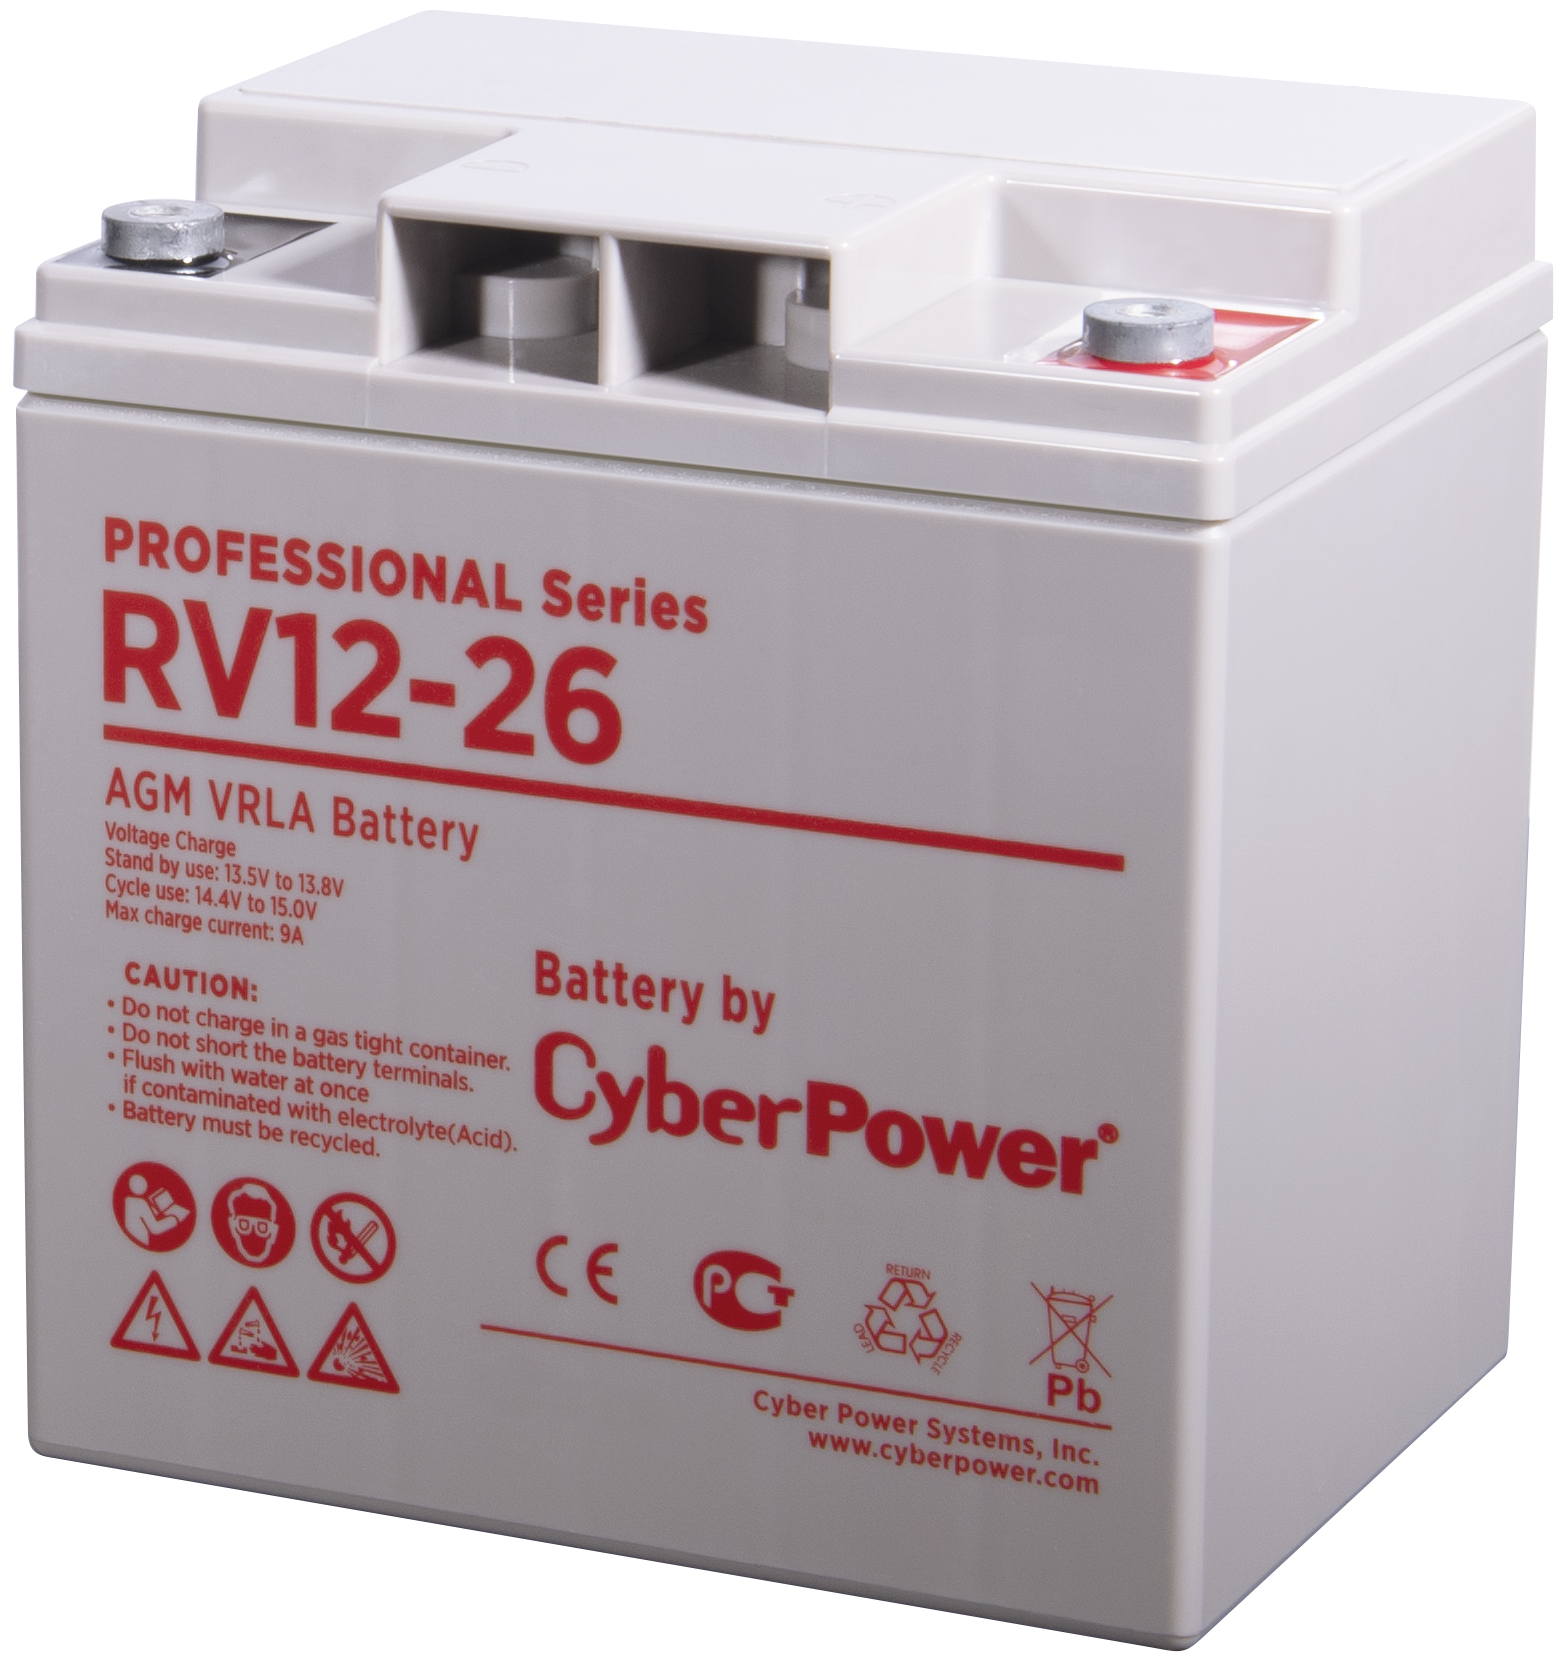 Батарея CyberPower Battery Professional series RV 12-26, voltage 12V, capacity (discharge 20 h) 30.4Ah, capacity (discharge 10 h) 30Ah, max. discharge current (5 sec) 600A, max. charge current 9A, lead-acid type AGM, terminals under bolt M6, LxWxH 166x128x175mm., full heigh